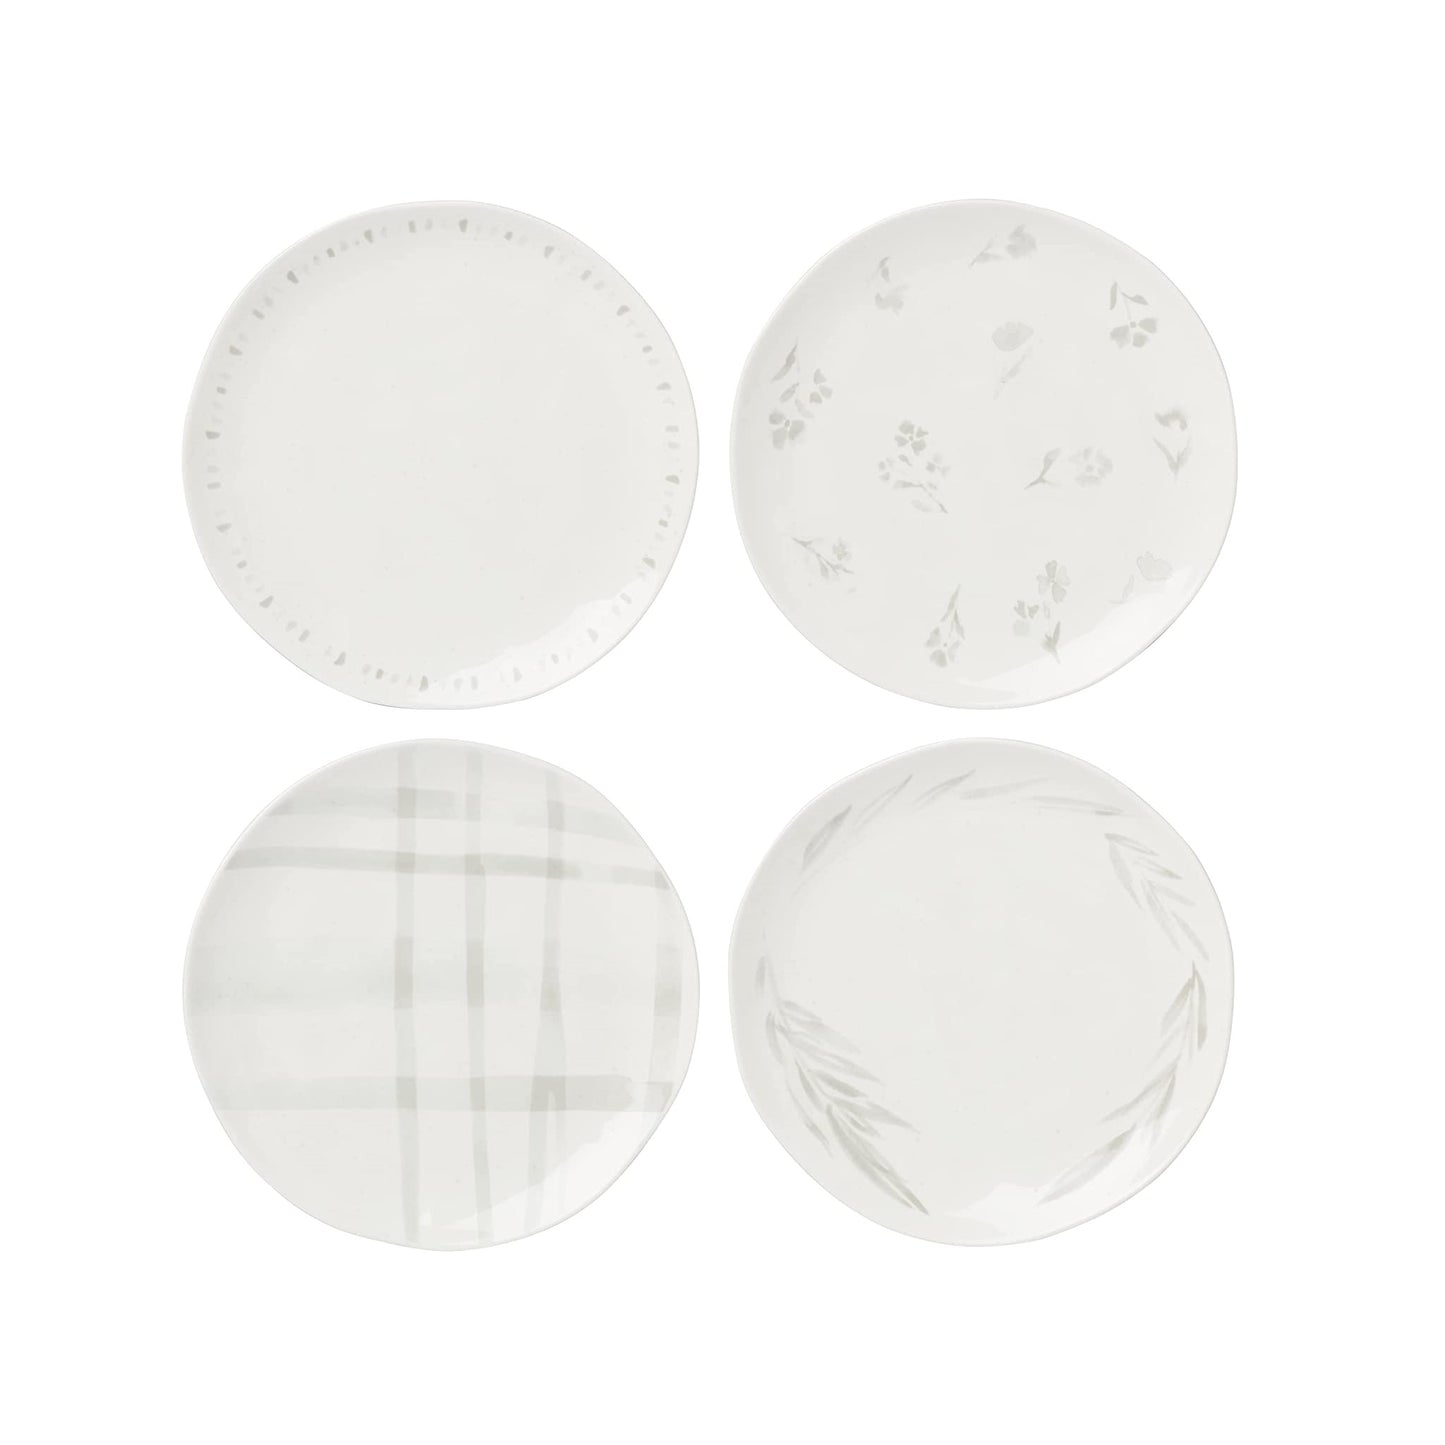 Lenox Oyster Bay Assorted Accent Plates, Set of 4